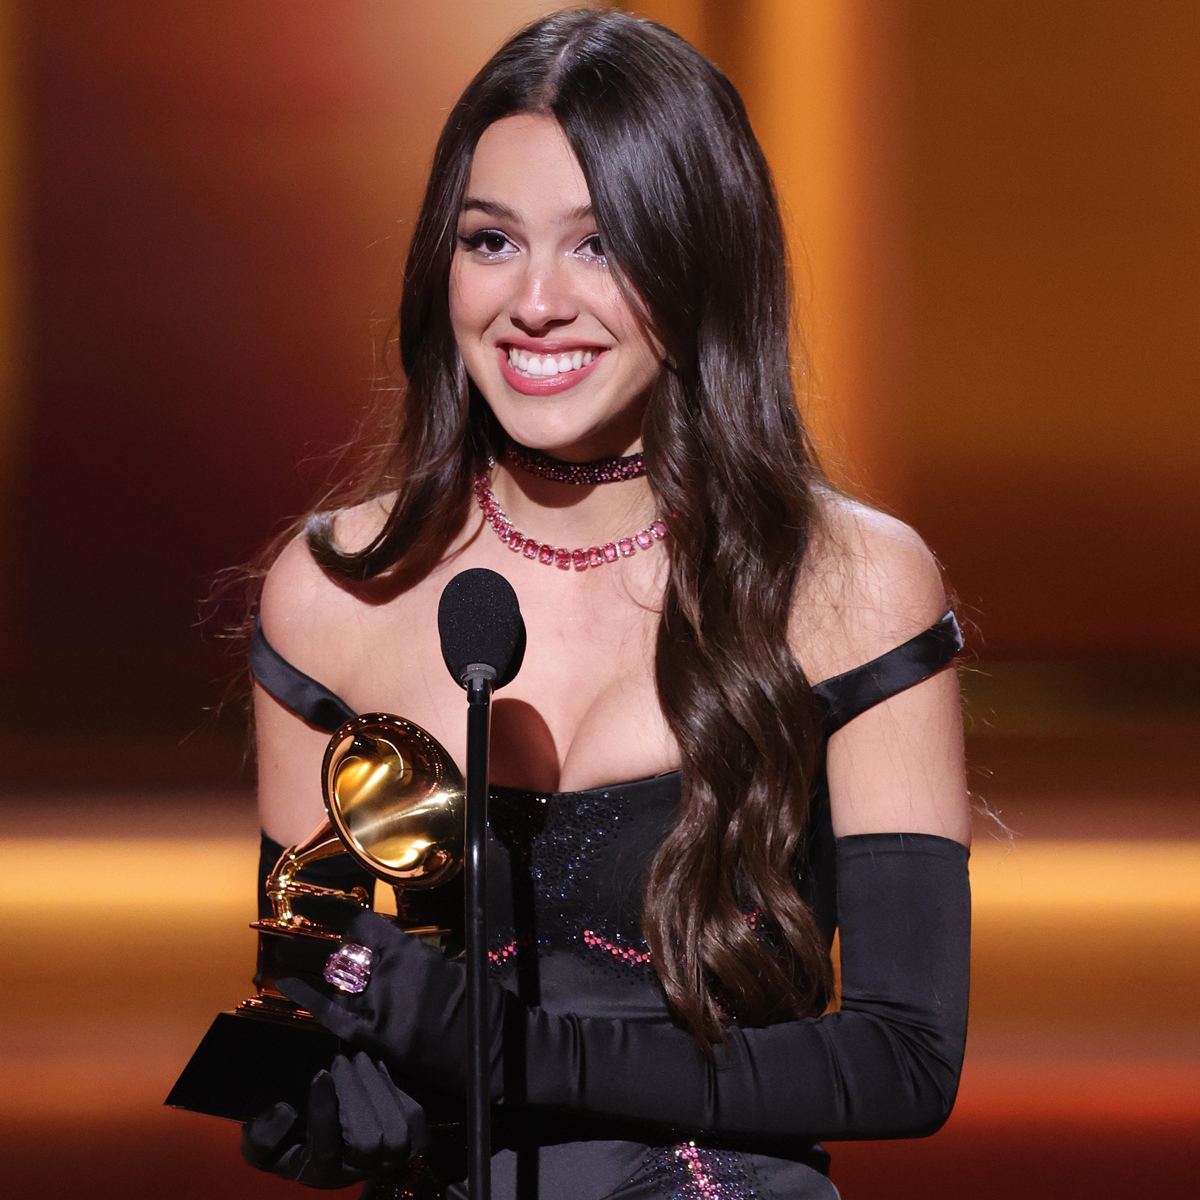 https://akns-images.eonline.com/eol_images/Entire_Site/202233/rs_1200x1200-220403181631-1200-olivia-rodrigo-winning-2022-grammys-red-carpet-fashion.jpg?fit=around%7C1080:1080&output-quality=90&crop=1080:1080;center,top